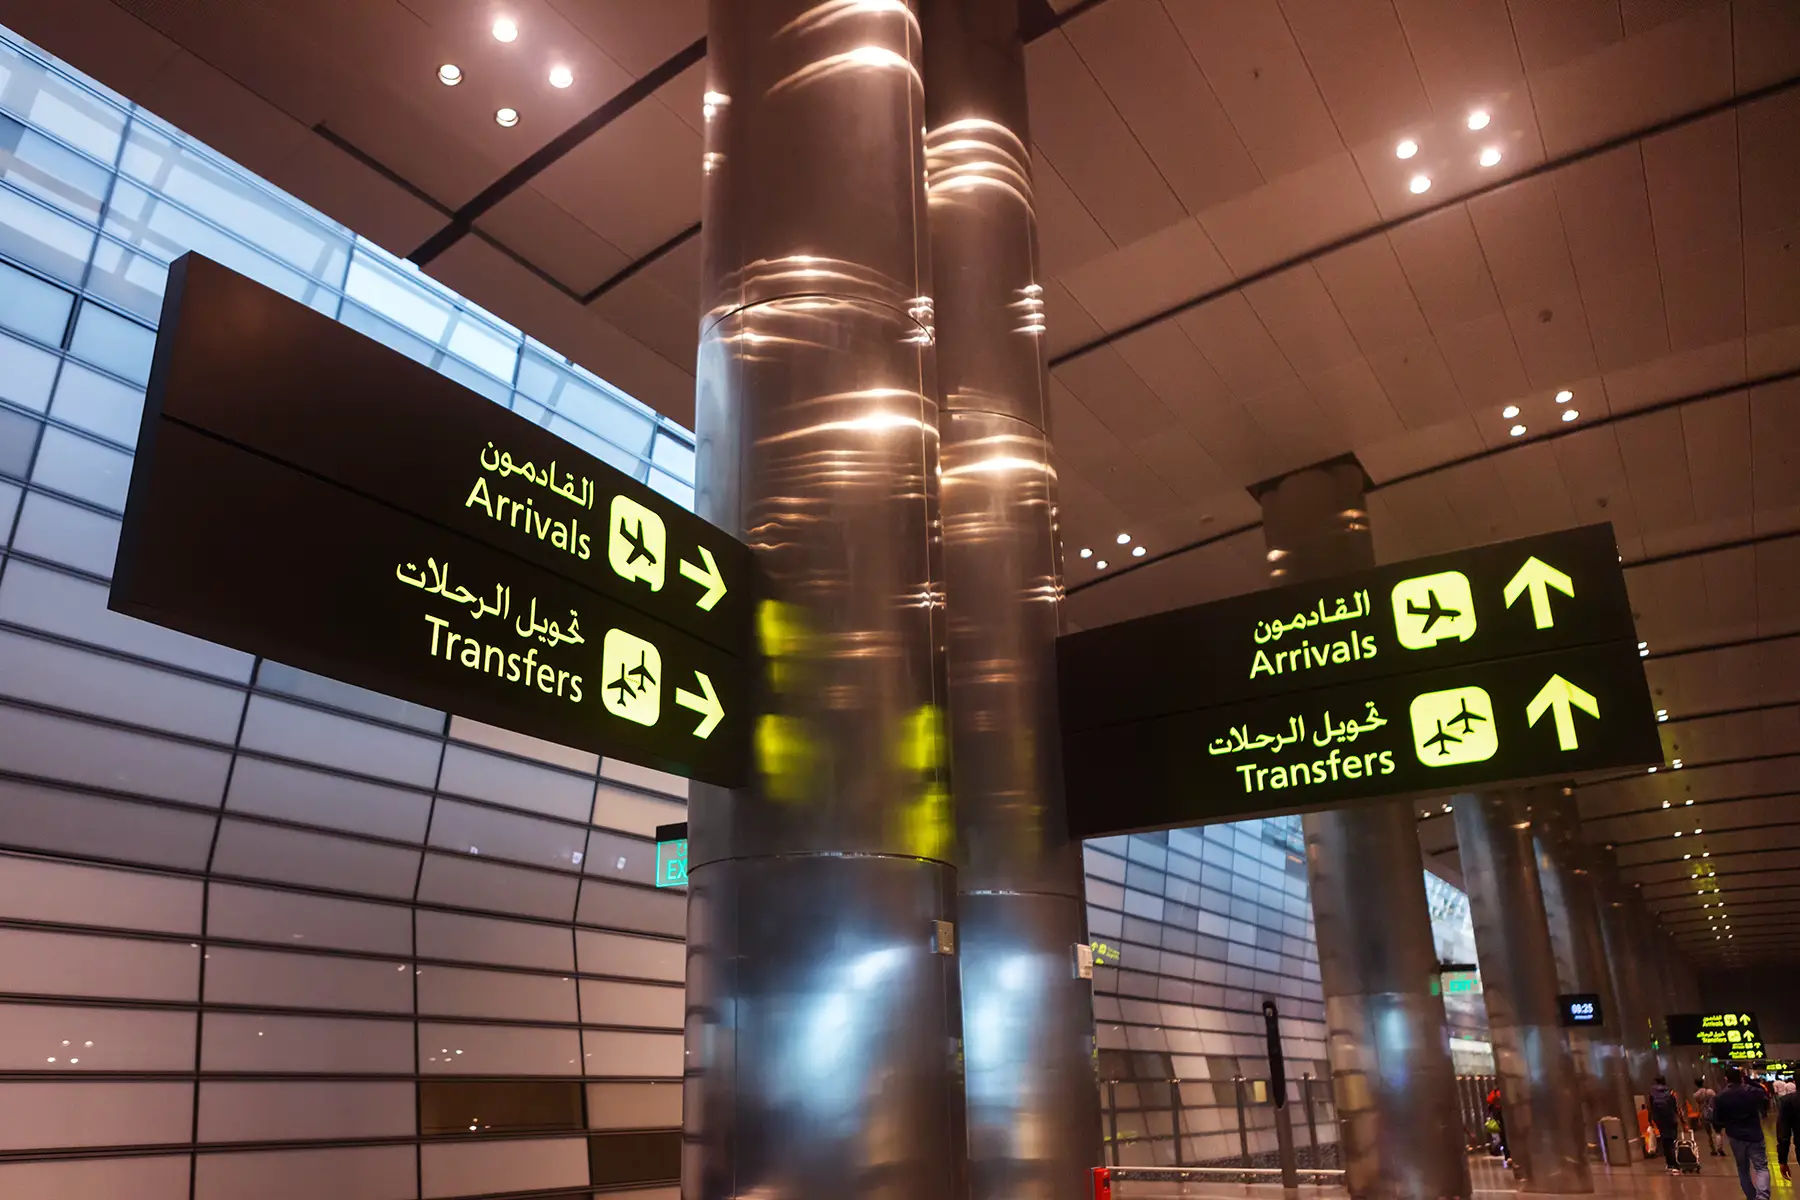 Arrivals signs at Hamad International Airport in Qatar